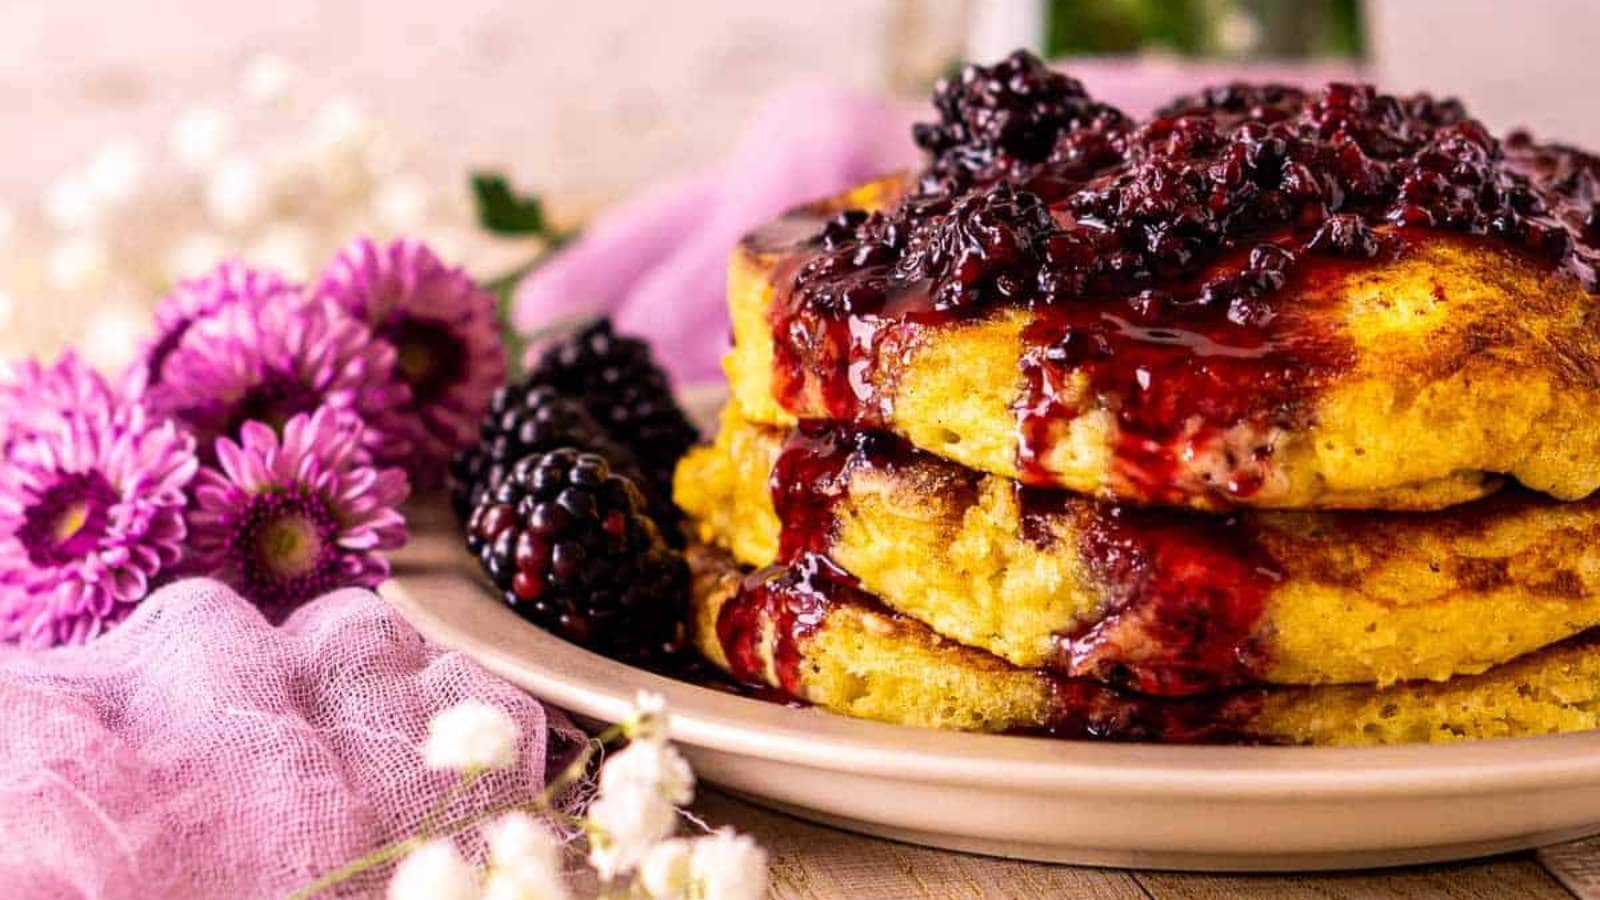 Blackberry Pancakes With Blackberry Syrup recipe by Burrata And Bubbles.